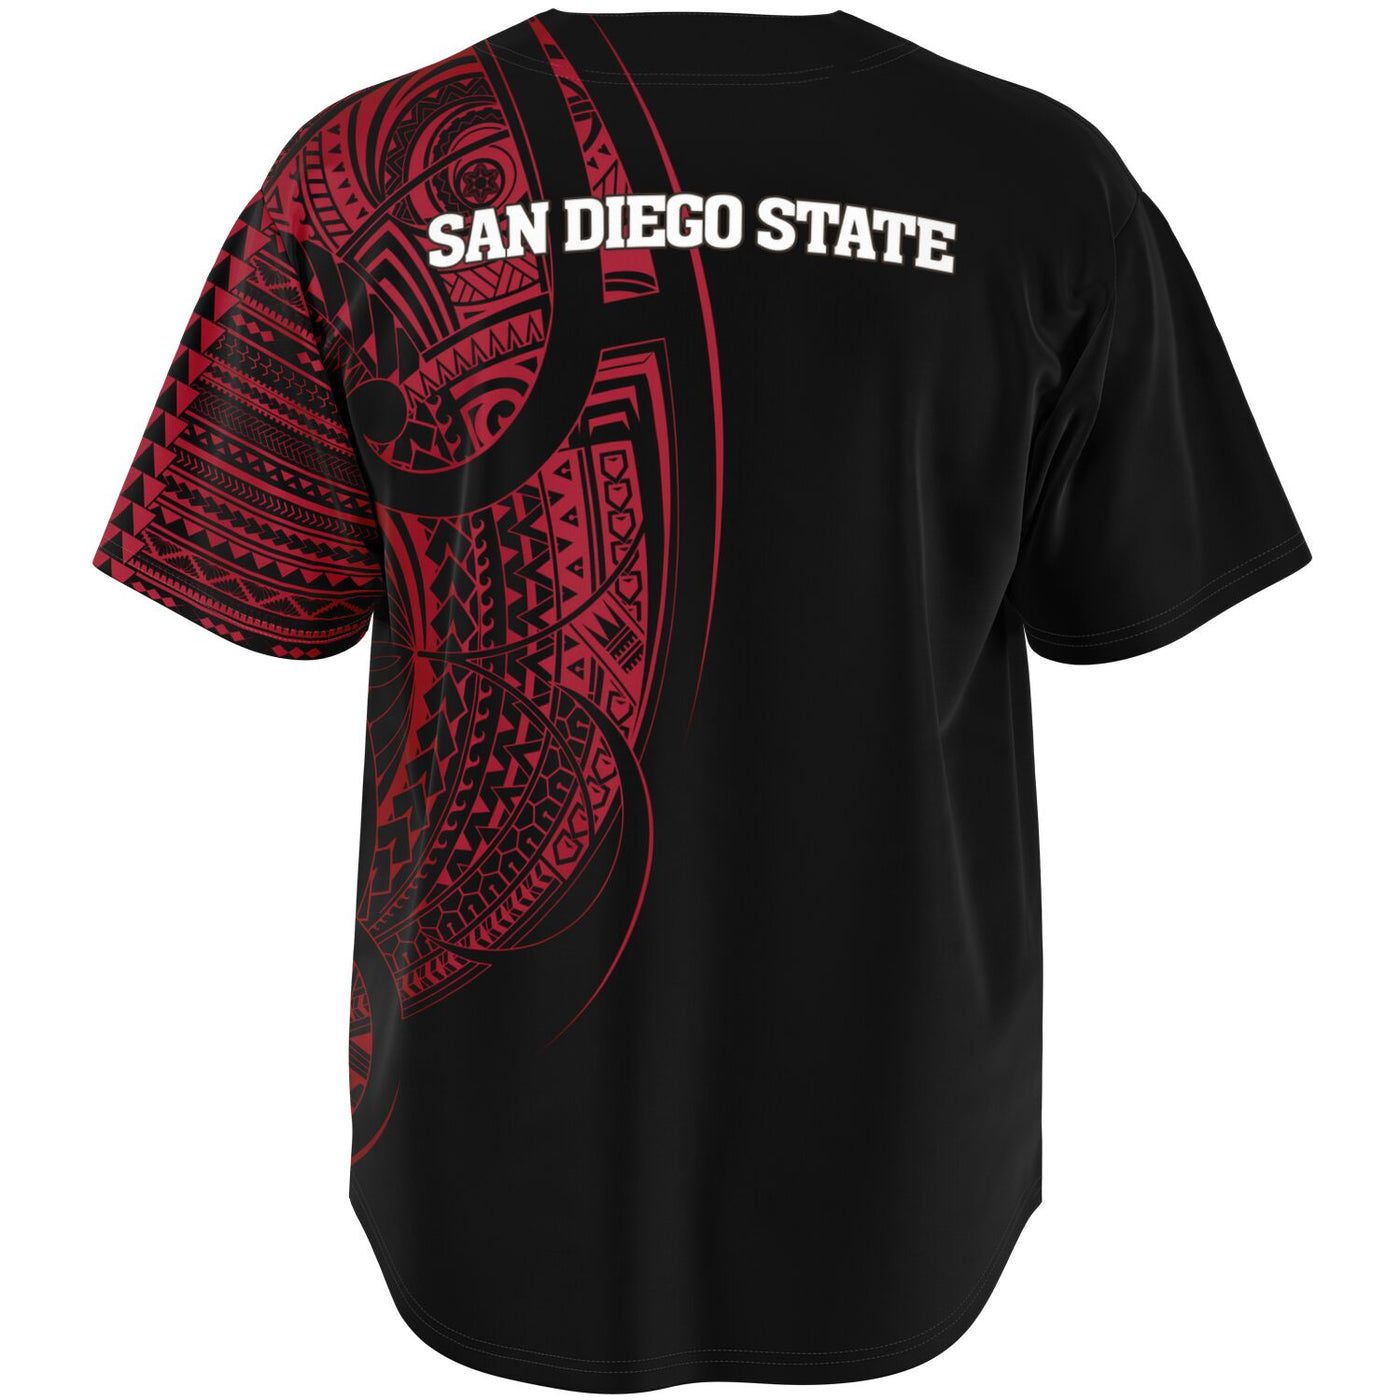 Available] Get New Custom San Diego State Aztecs Jersey